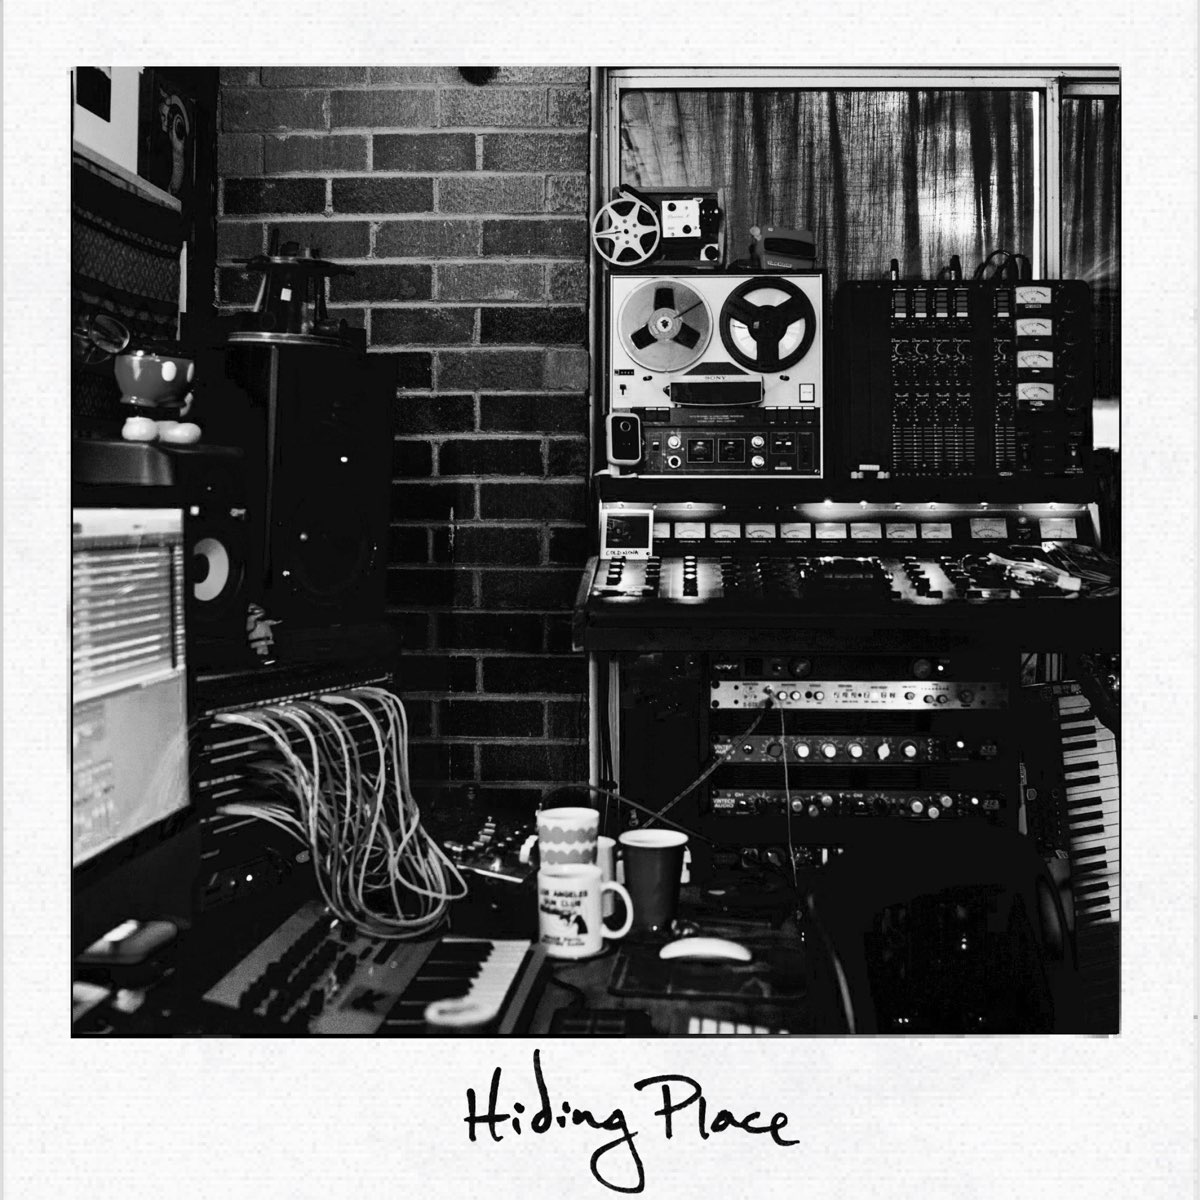 Music hid. Hidden place discography.